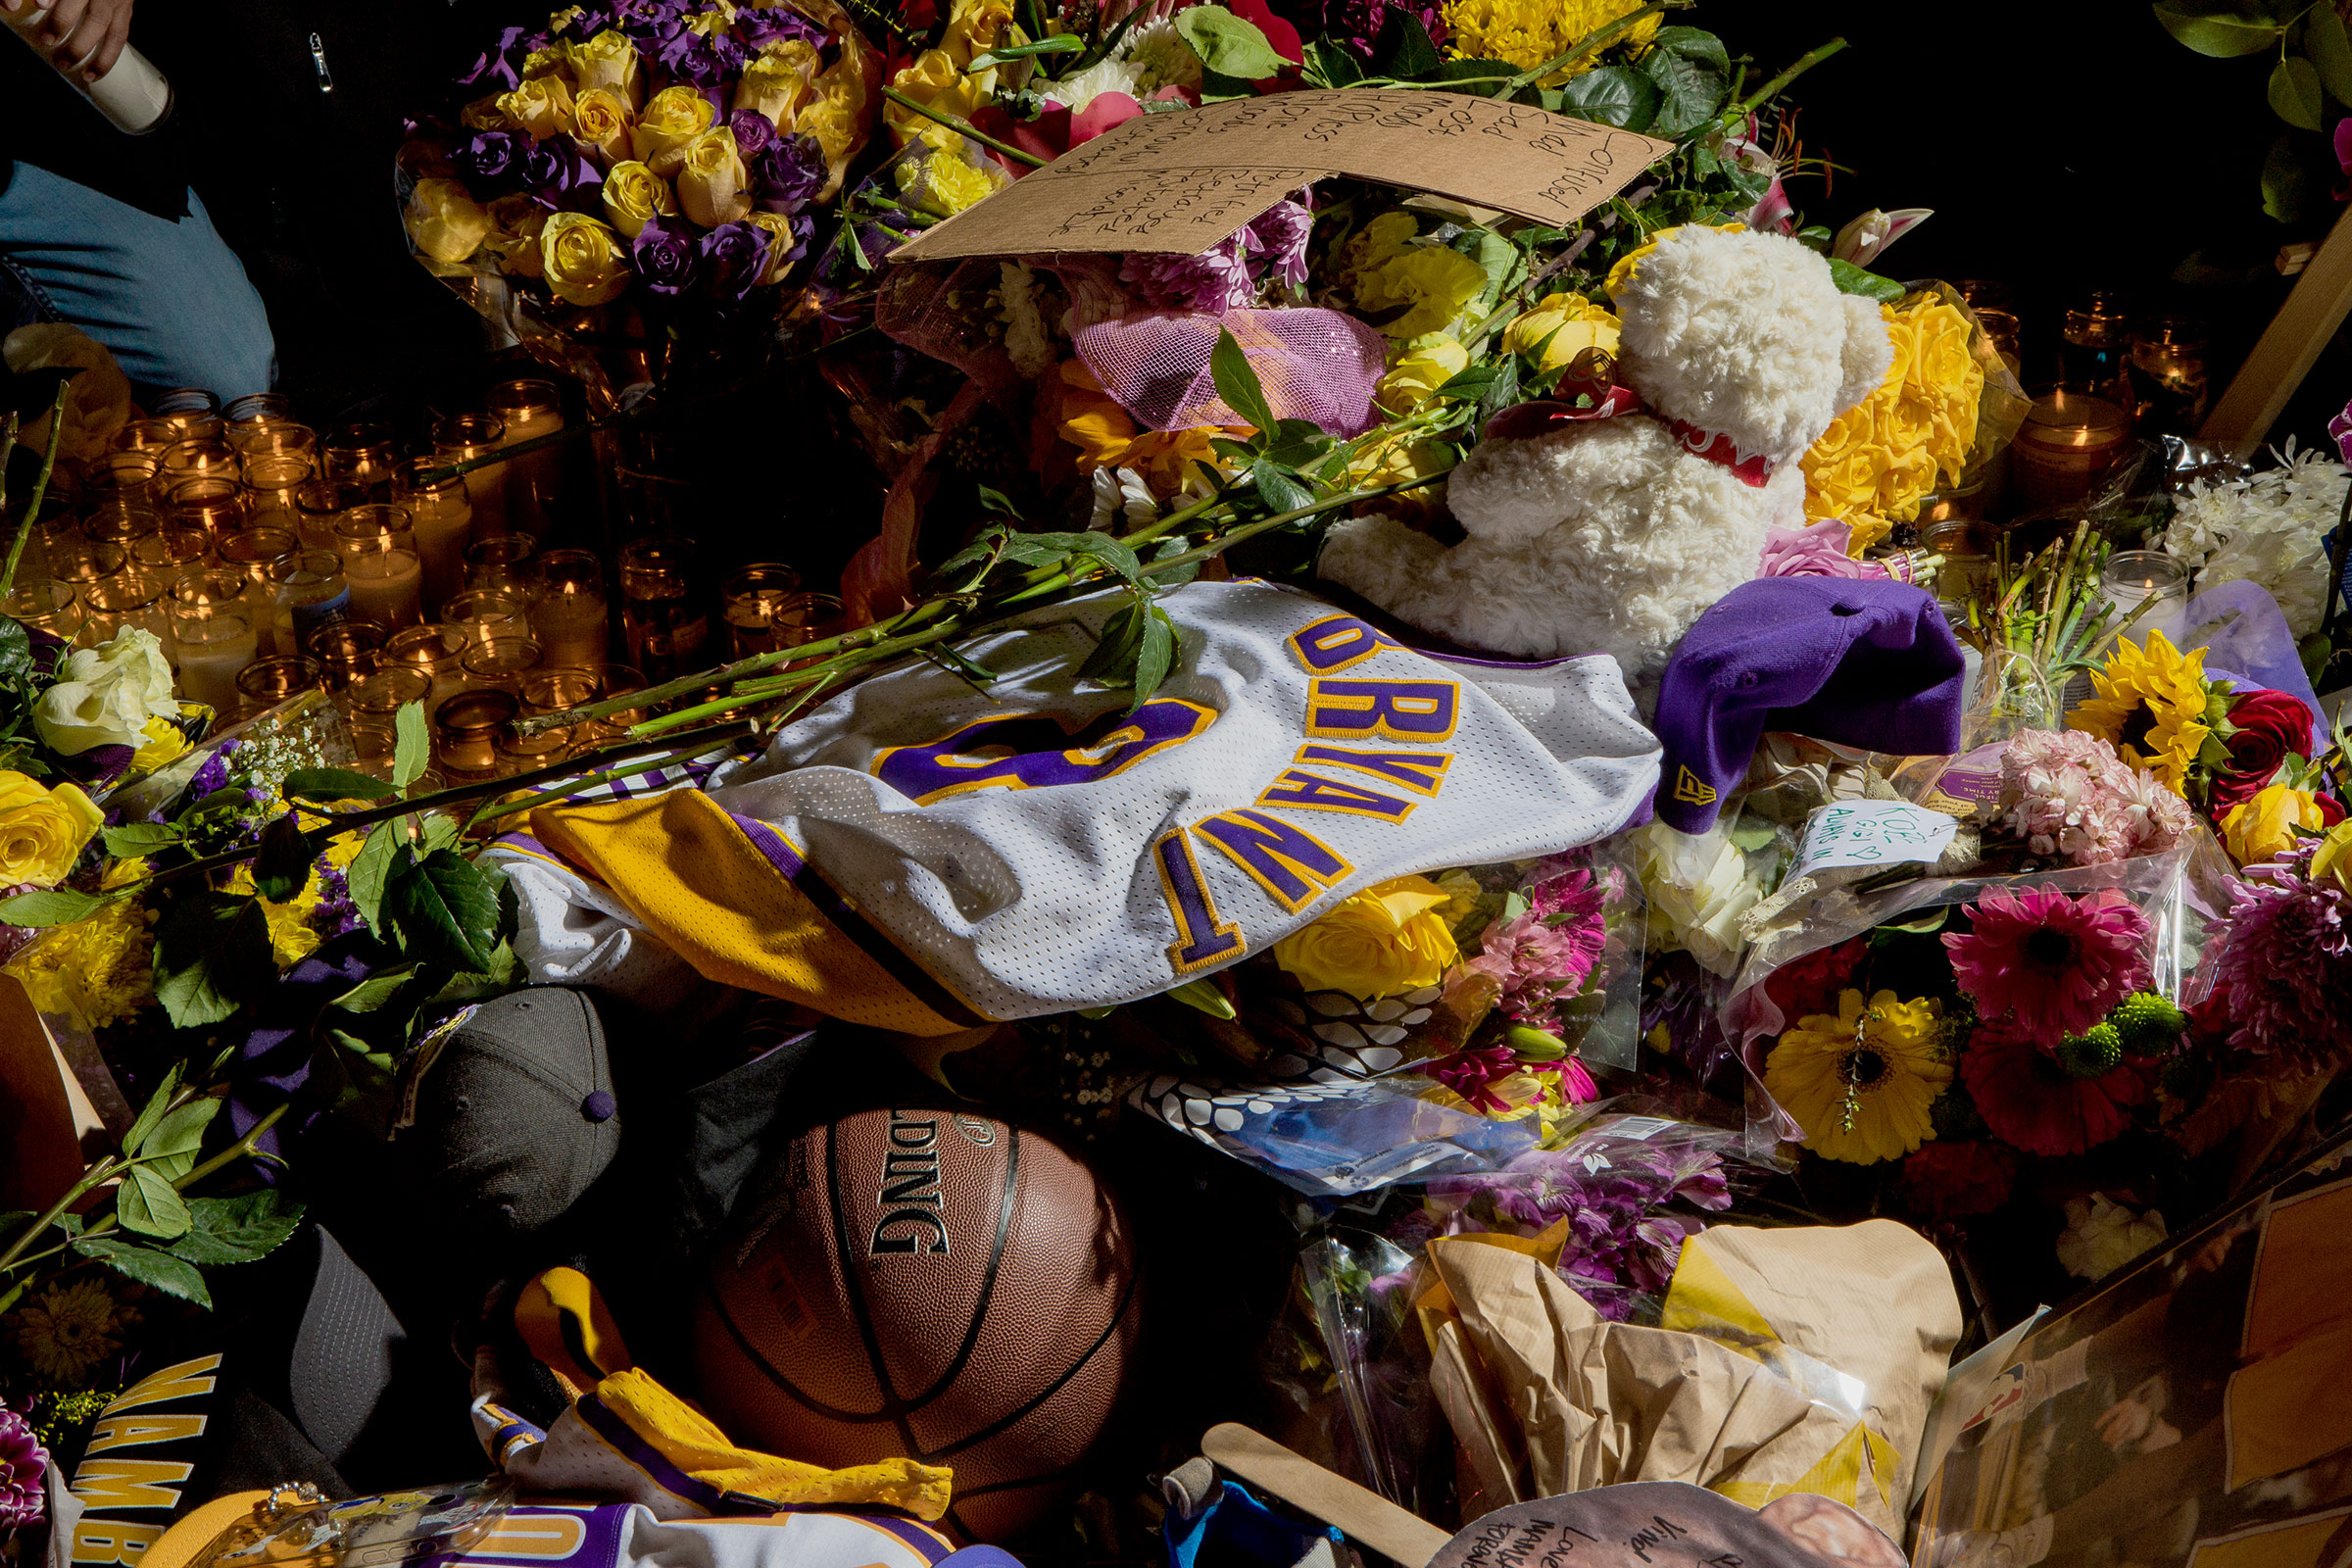 Hundreds of fans gathered near Staples Center in Los Angeles to mourn the death of Kobe Bryant, who died in a January helicopter crash in Calabasas, along with eight others, including his daughter Gianna, 13. (Alex Welsh for TIME)